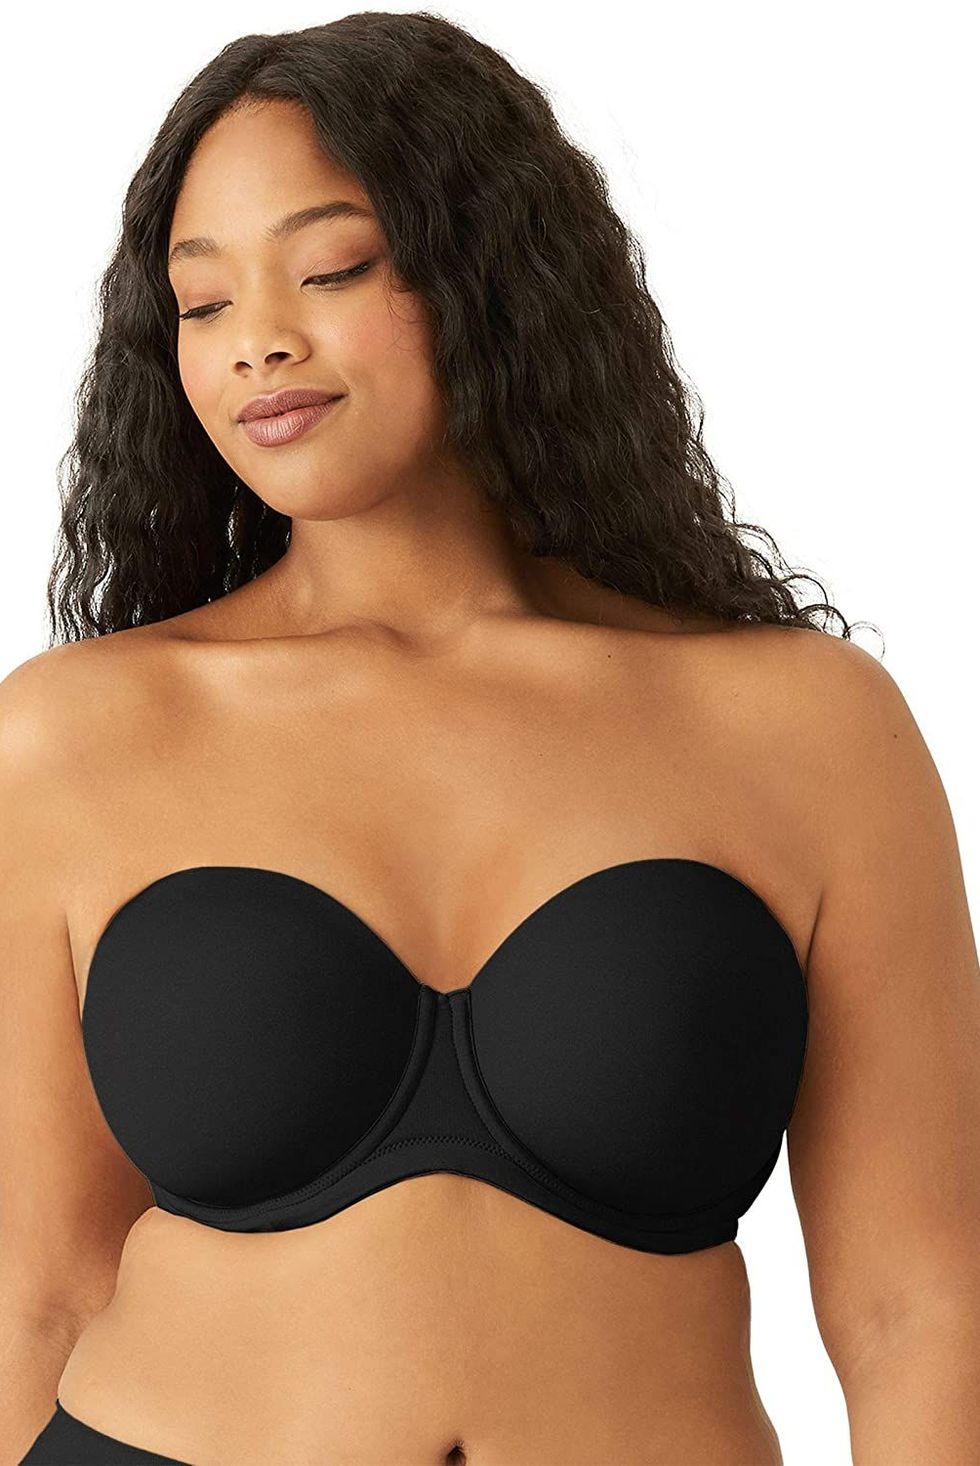 I'm Ditching My Strapless Bras for These 18 Well-Reviewed Alternatives